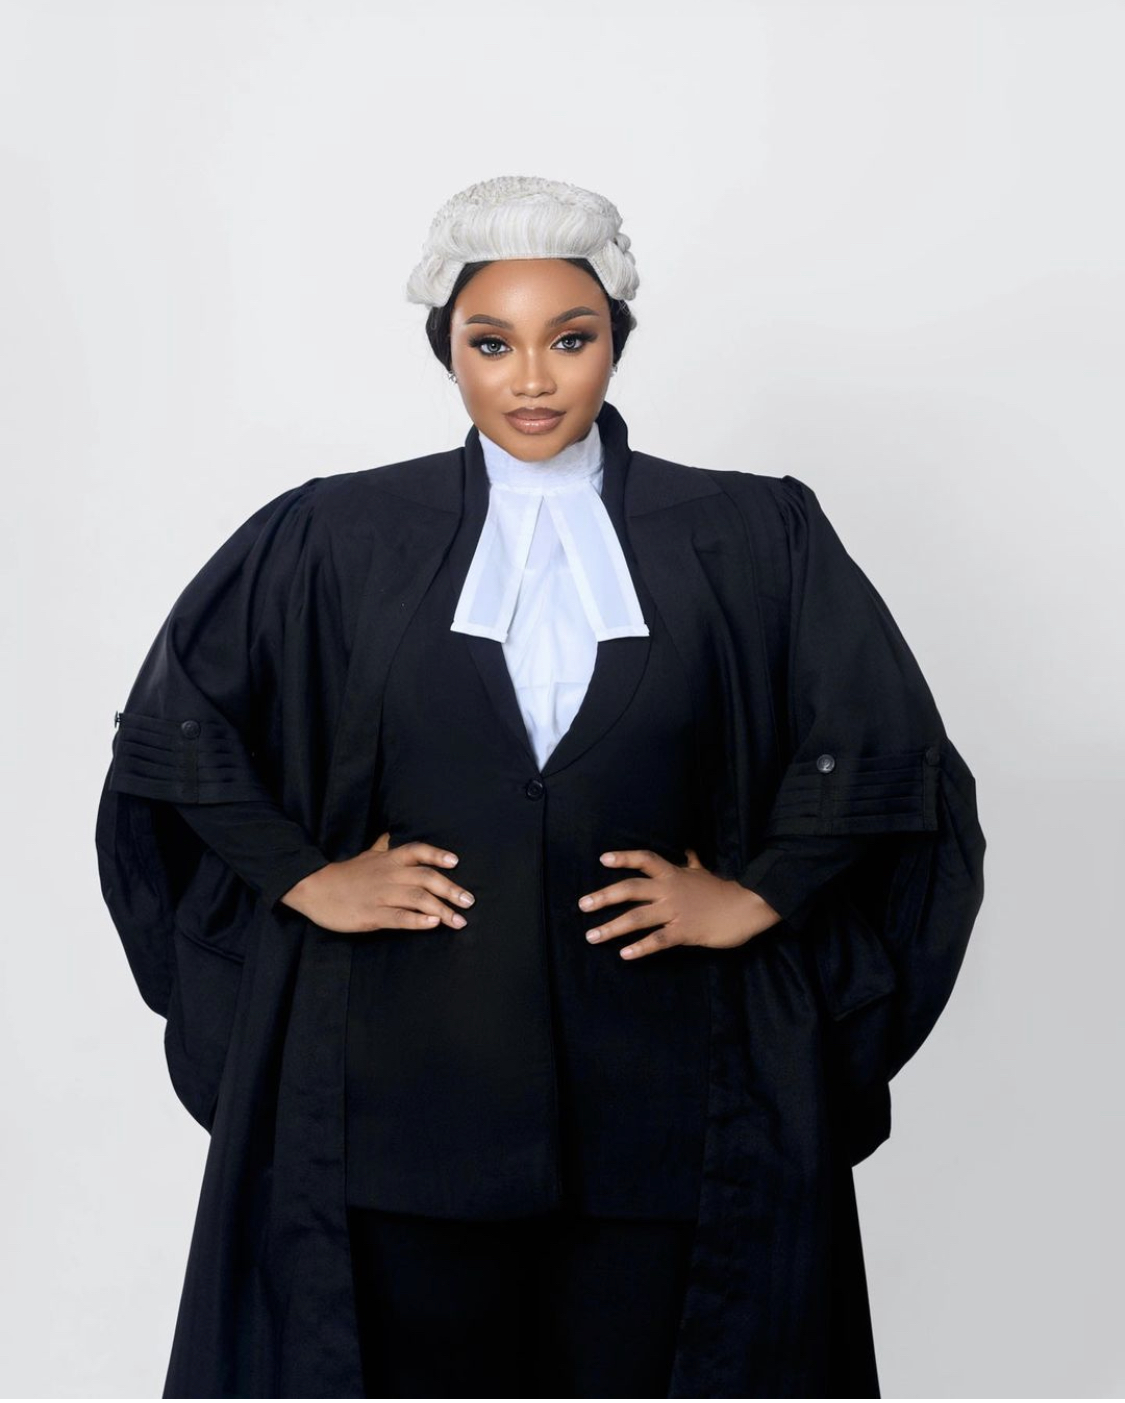 Ex-BBNaija Housemate JMK Officially becomes Lawyer as she gets called to bar [photos]